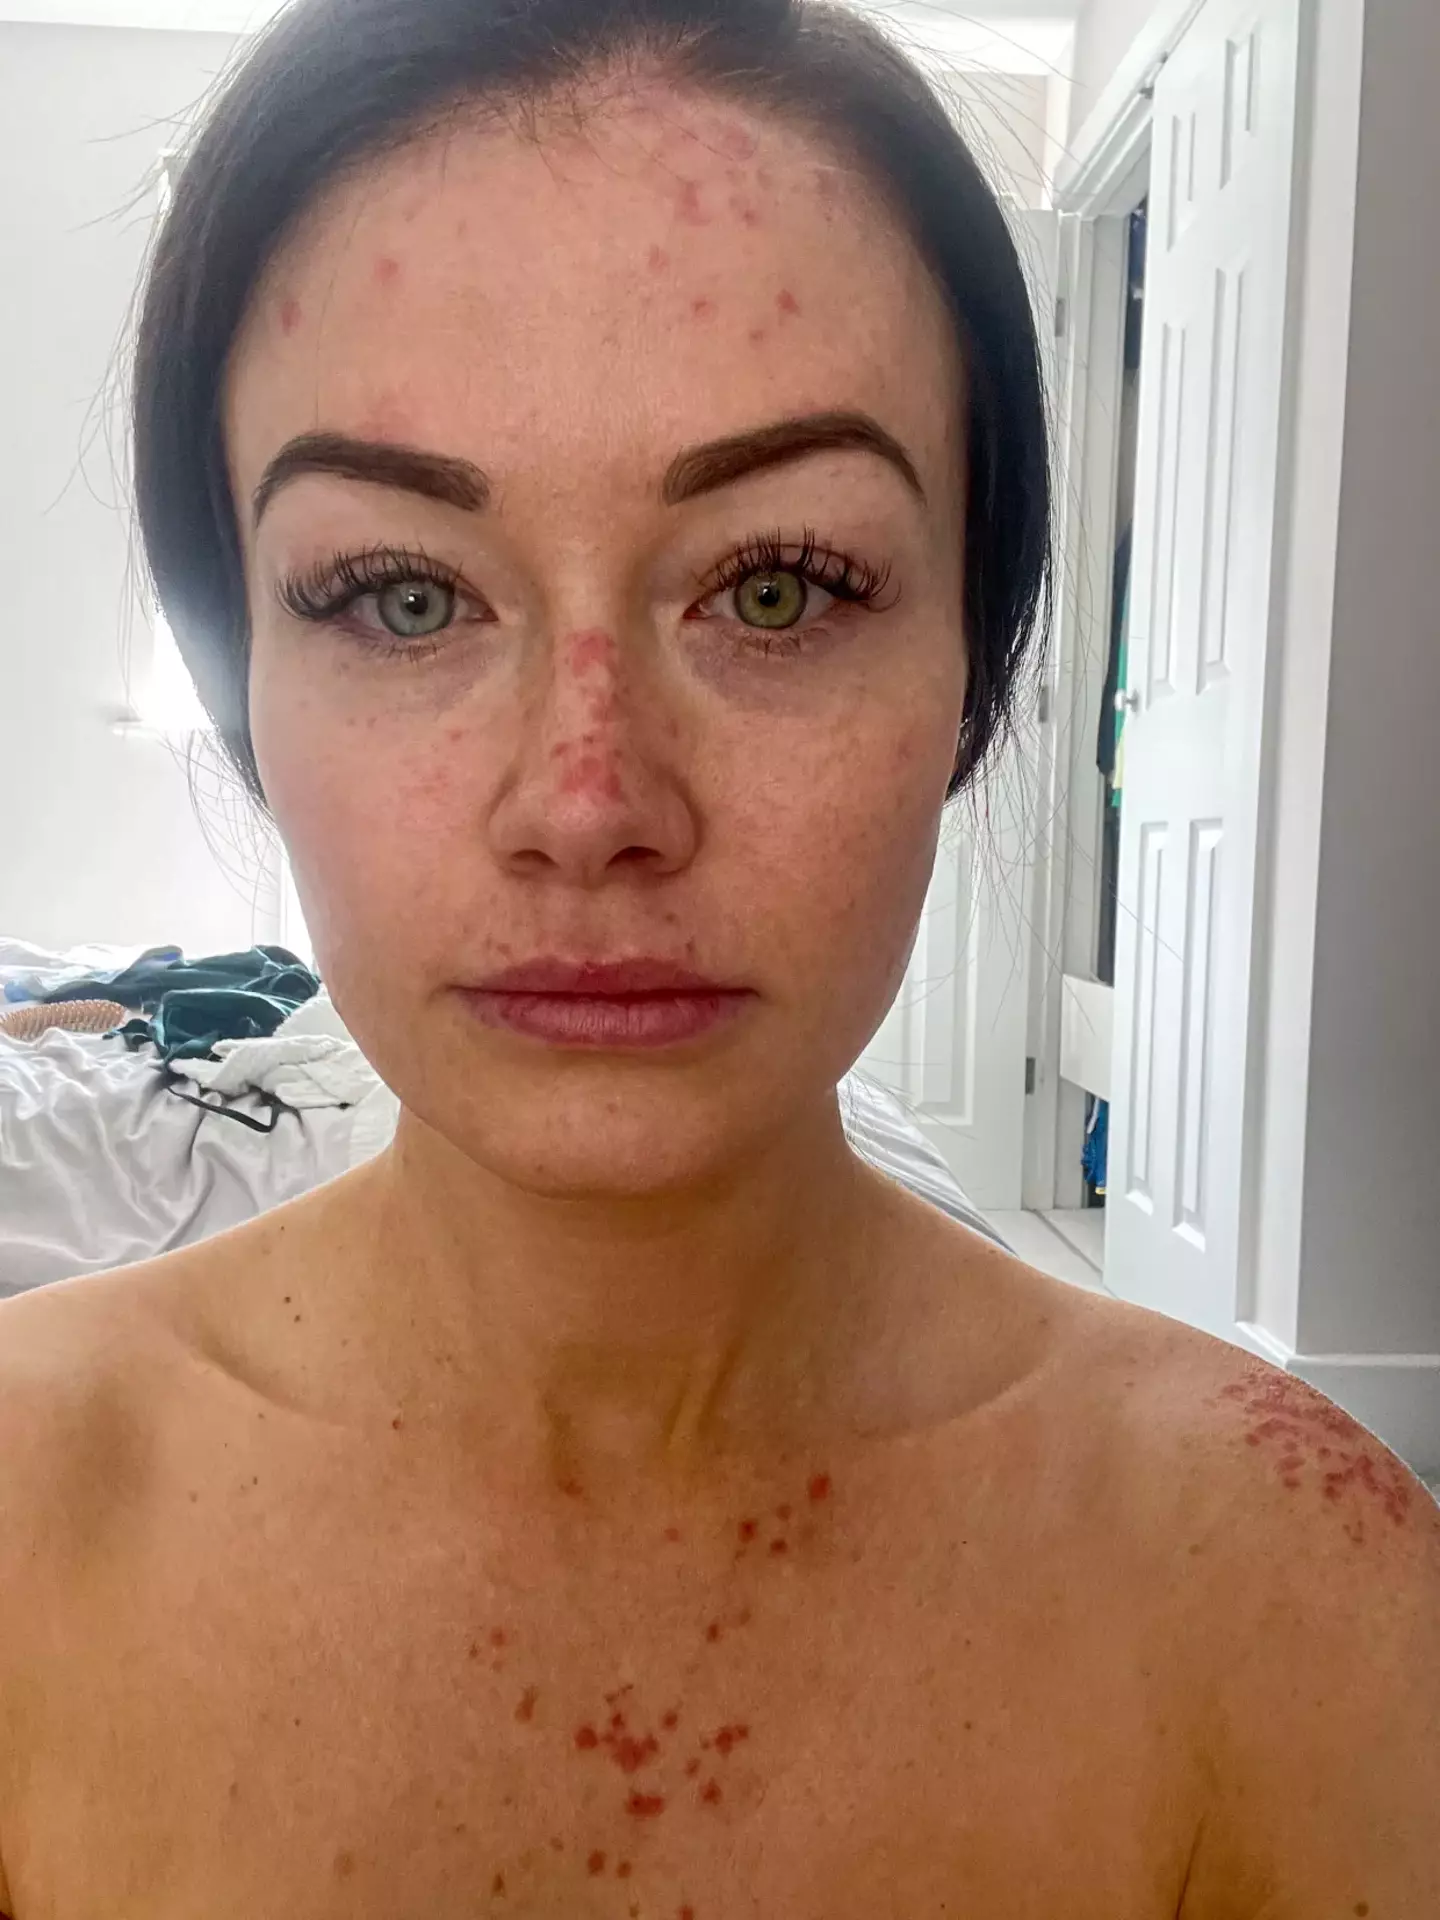 Jess Impiazzi thought was dying after getting severe flare ups of autoimmune disease symptoms.